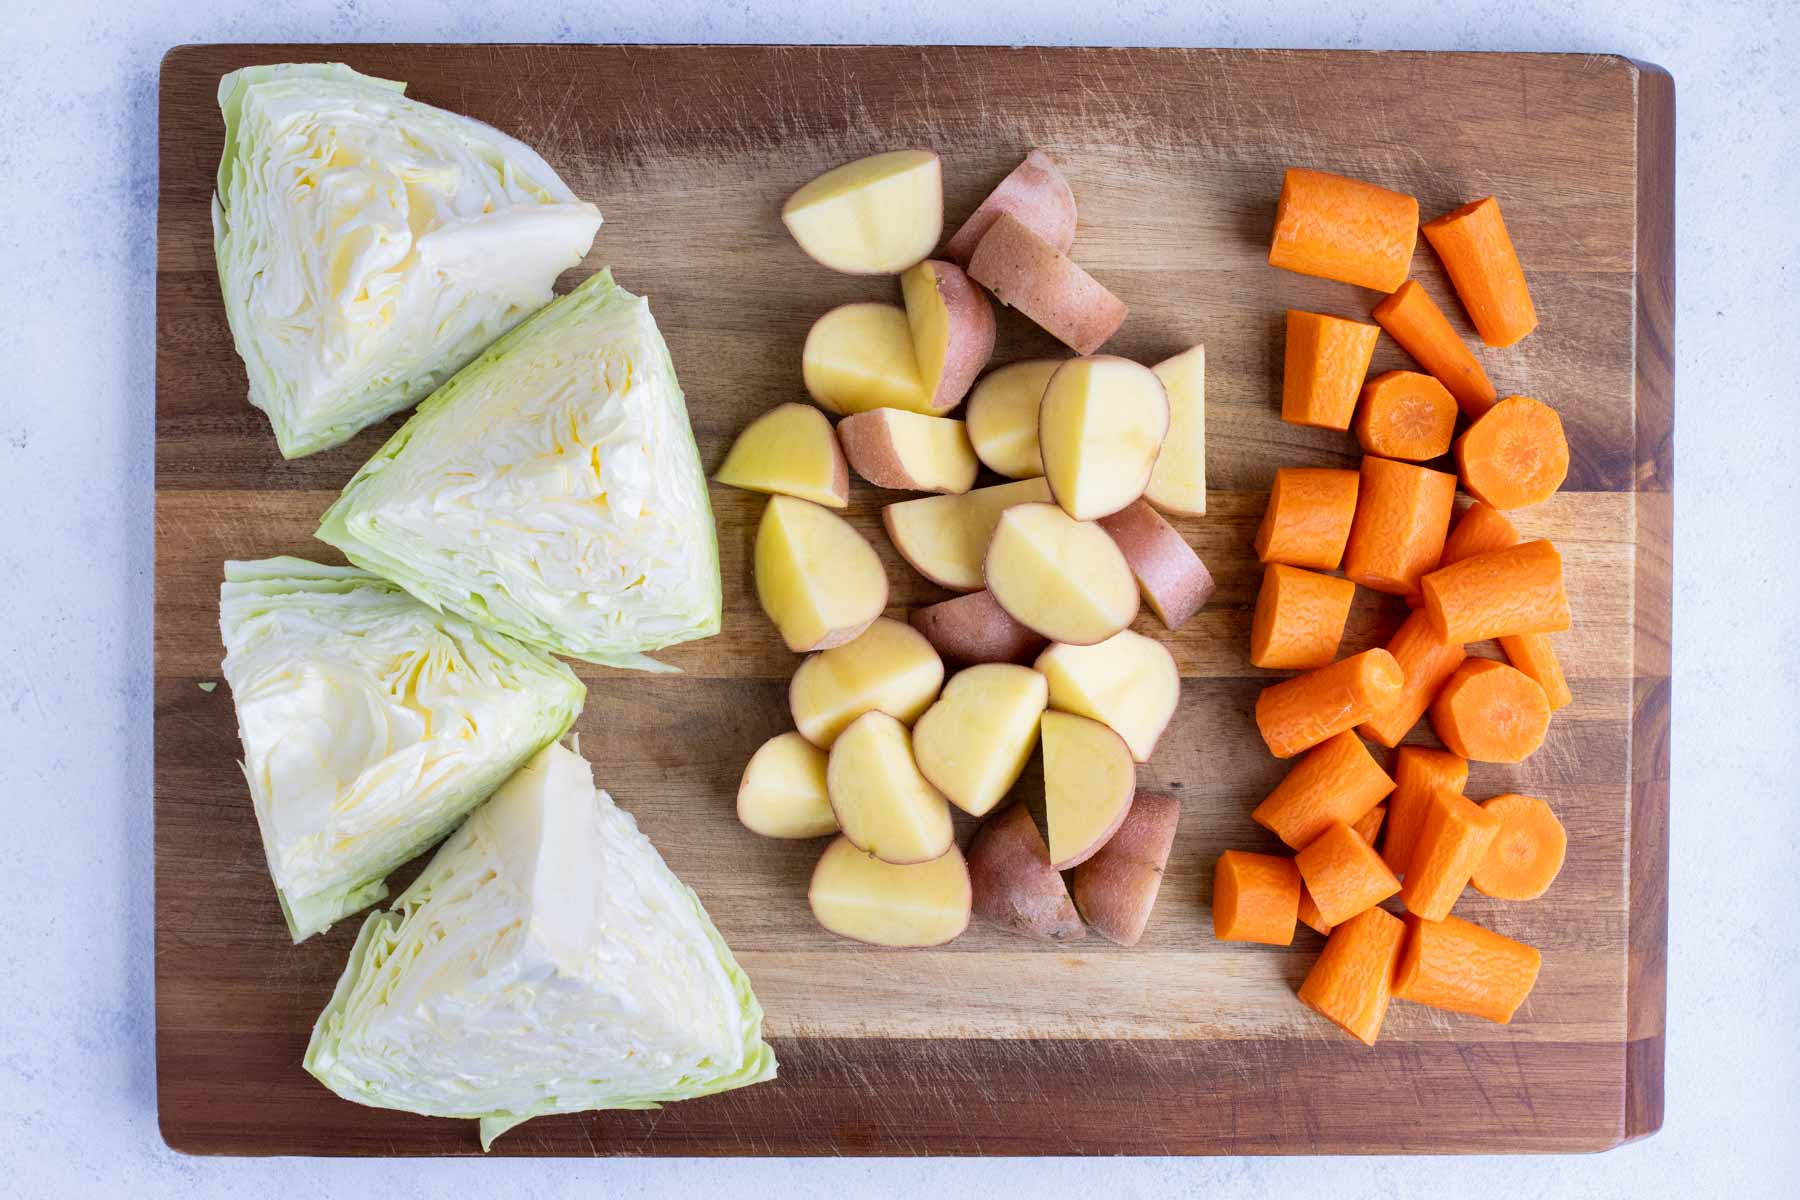 Potatoes, carrots, and cabbage are cubed on a cutting board.